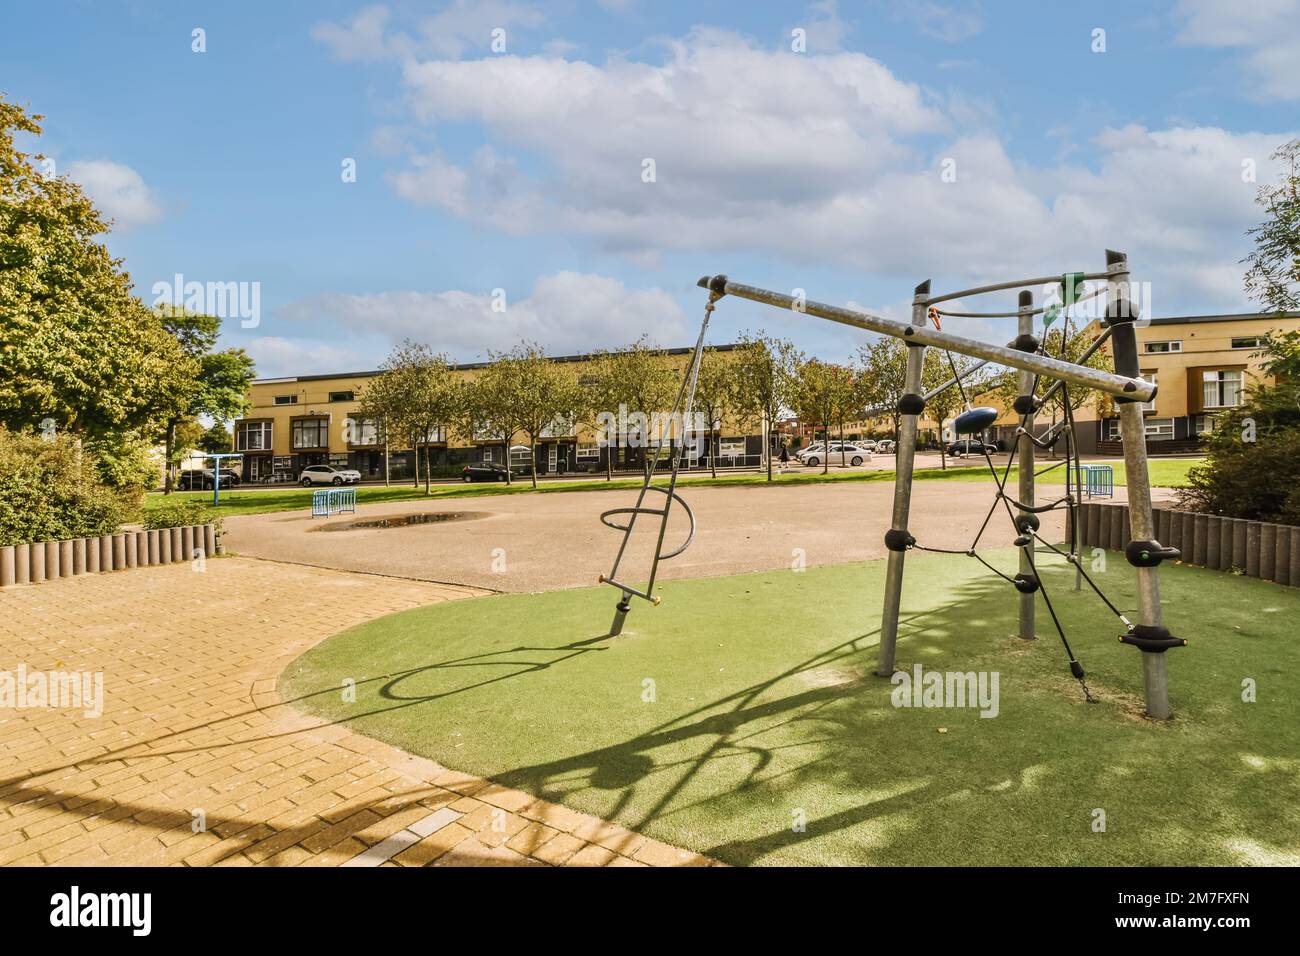 an outdoor playground area with swings, slides and climbing equipment on the ground in front of a school building is in the background Stock Photo